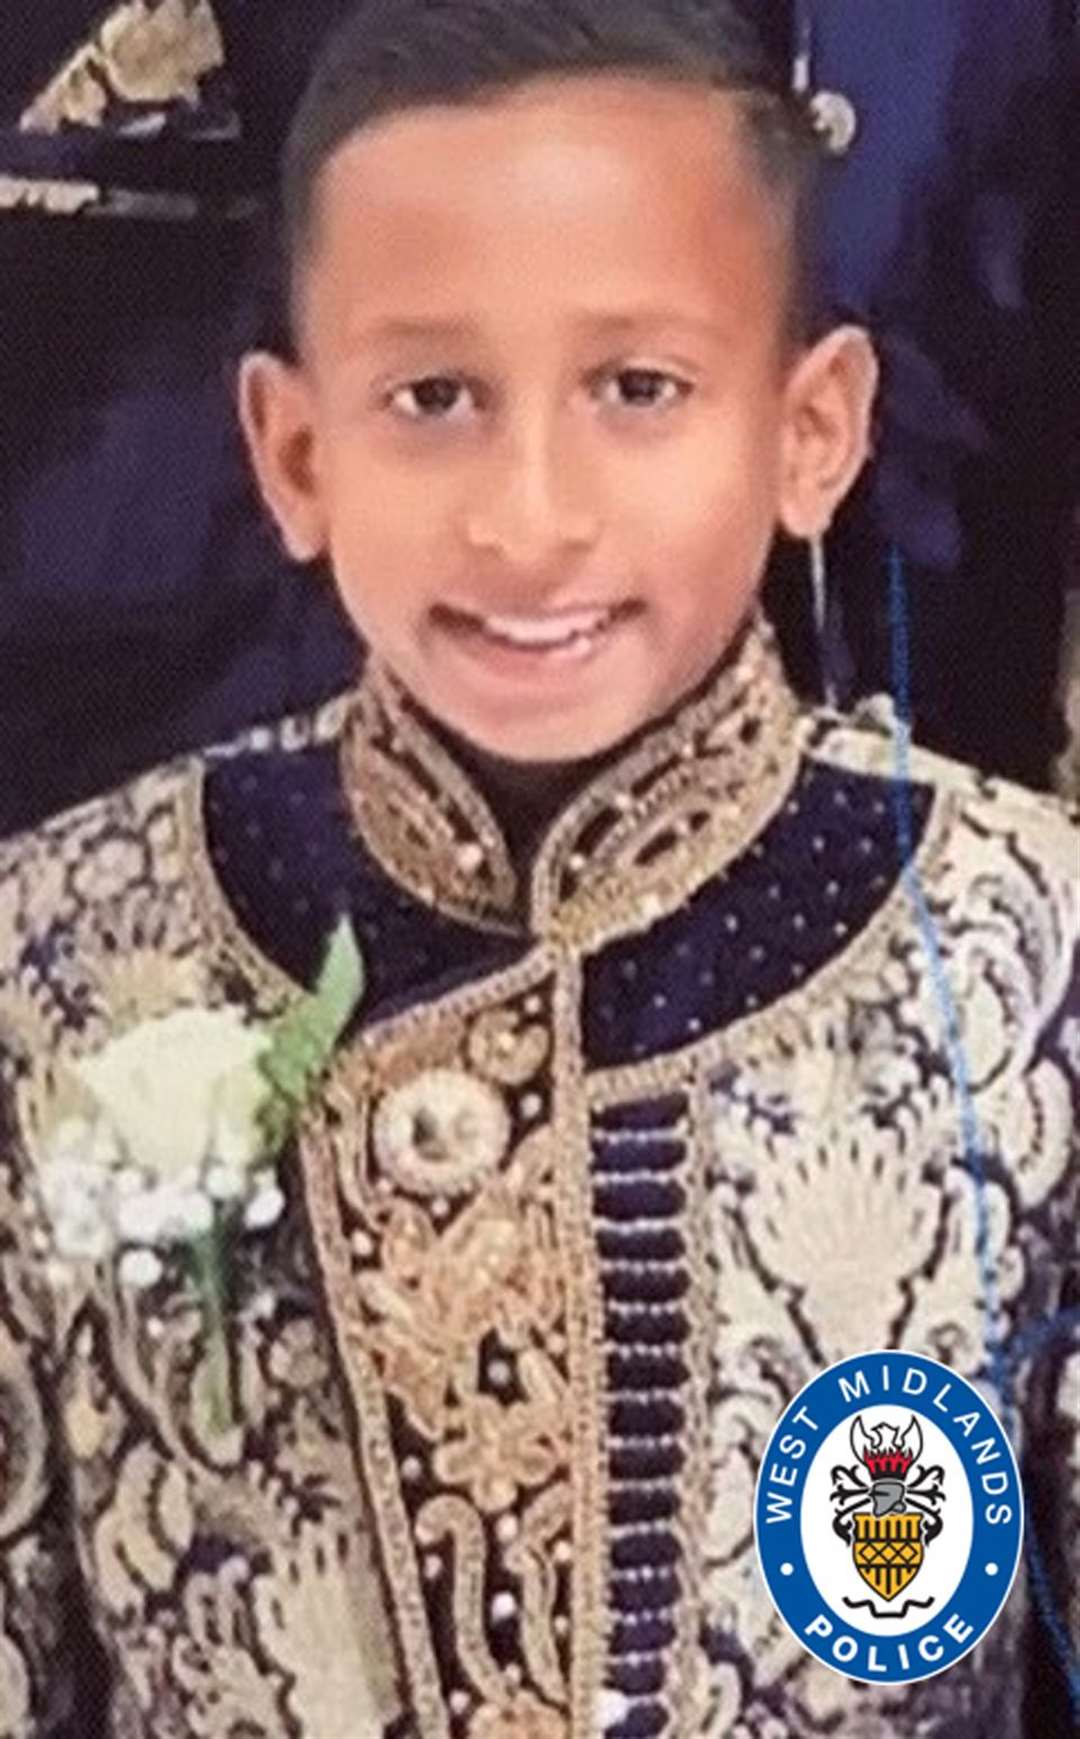 Sanjay Singh, 10, died in the crash in 2019 (West Midlands Police/PA)